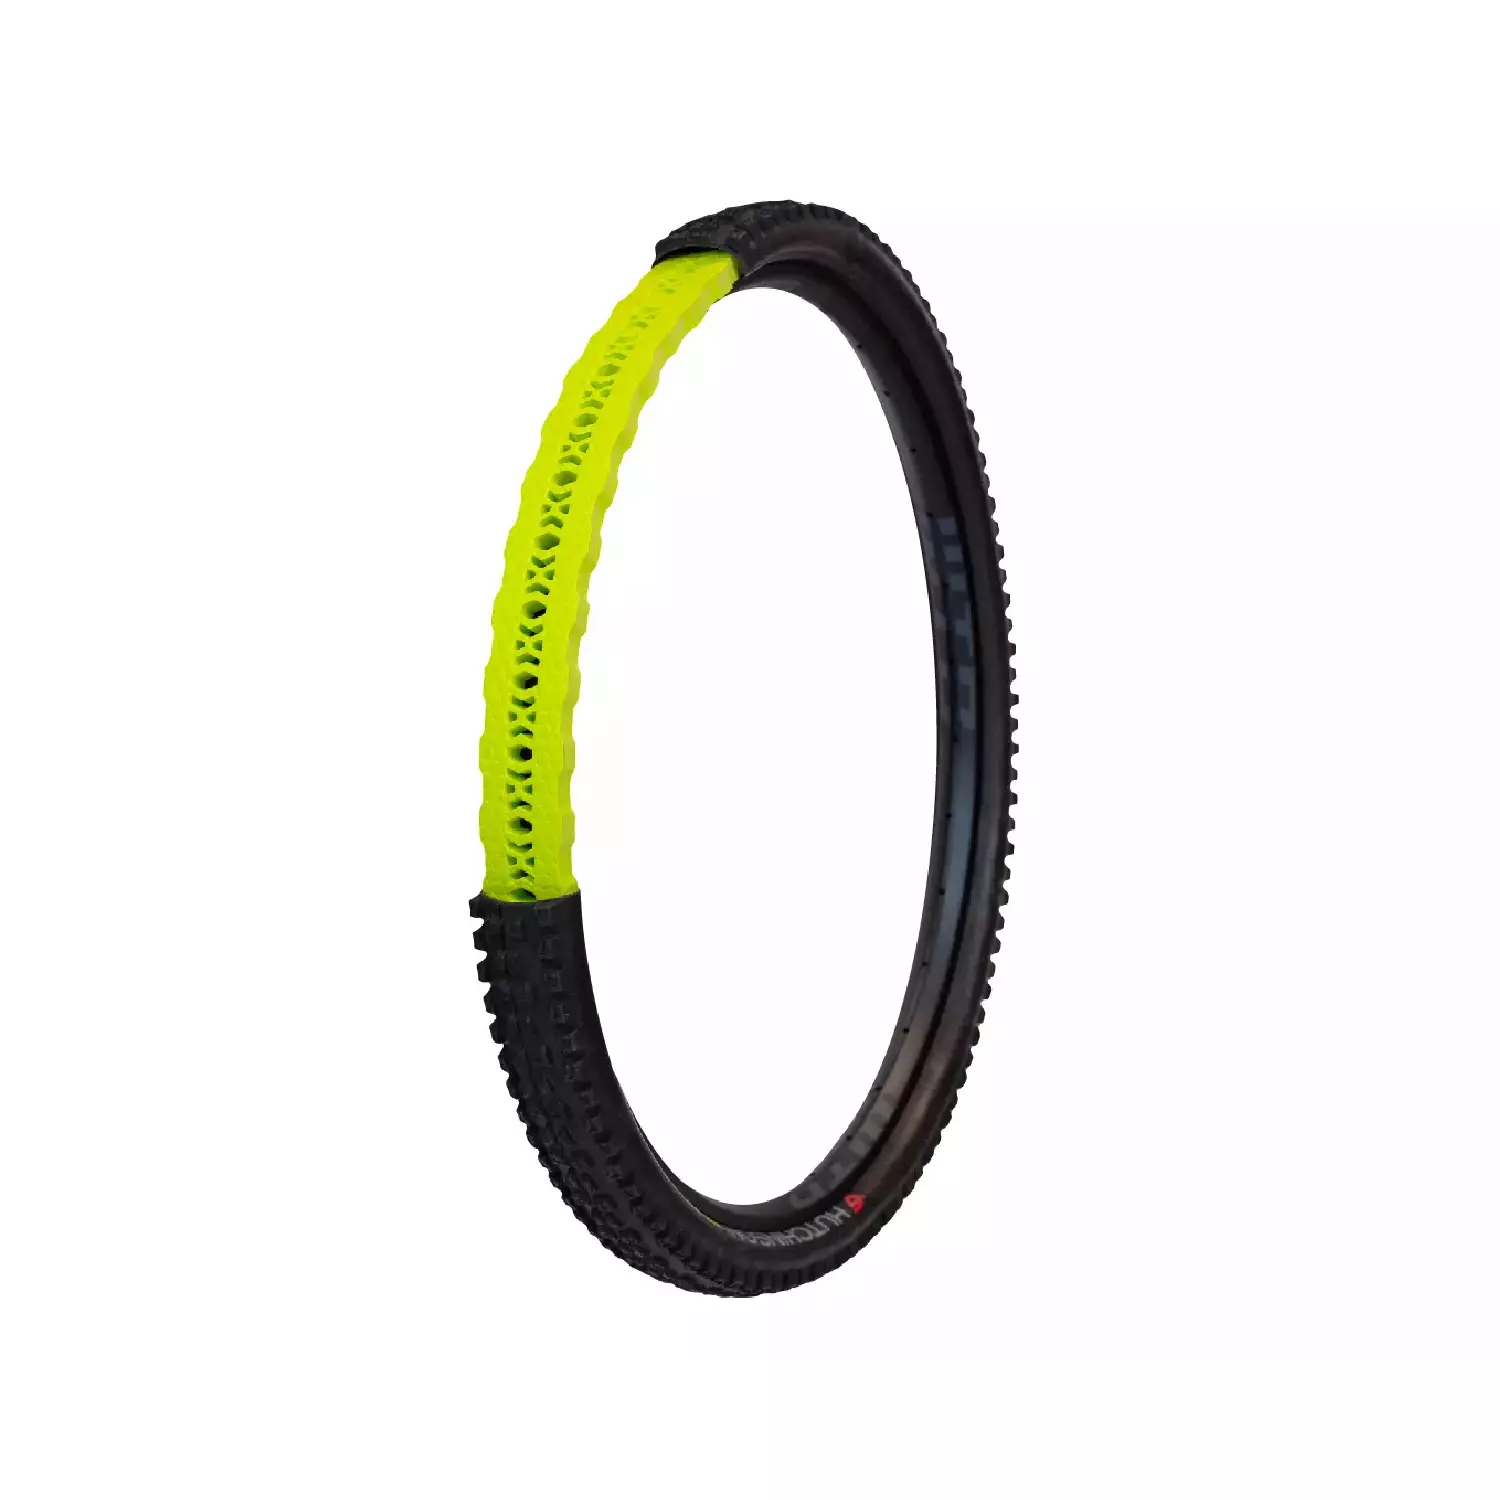 https://www.slicy-products.com/wp-content/uploads/2019/08/slicy-smooth-rim-protection.webp